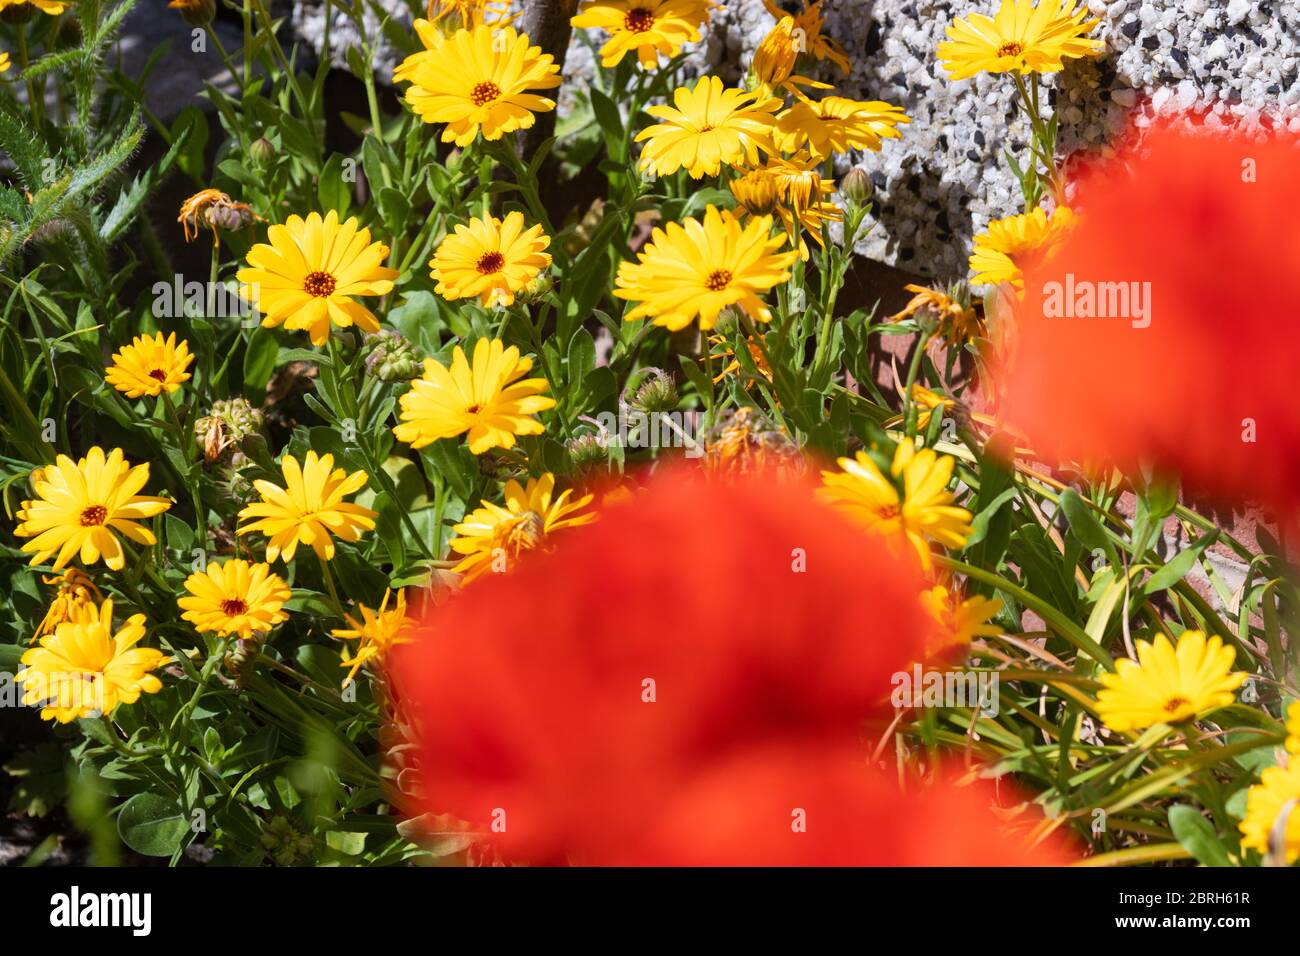 The pot marigold (Calendula officinalis) out of focus red poppies in the foreground. Stock Photo